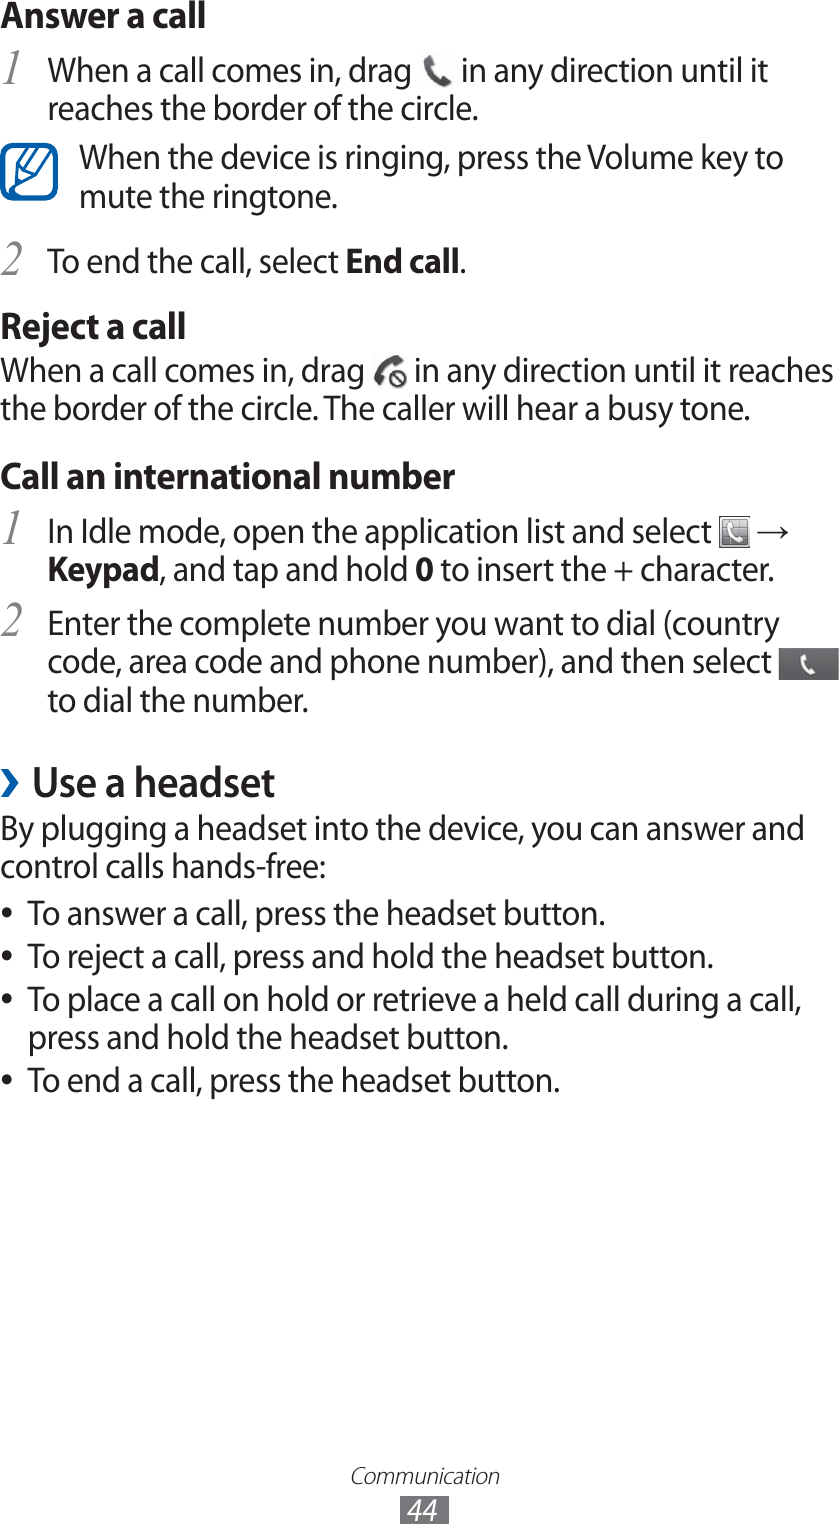 Communication44Answer a callWhen a call comes in, drag 1  in any direction until it reaches the border of the circle.When the device is ringing, press the Volume key to mute the ringtone.To end the call, select 2 End call.Reject a callWhen a call comes in, drag   in any direction until it reaches the border of the circle. The caller will hear a busy tone.Call an international numberIn Idle mode, open the application list and select 1  → Keypad, and tap and hold 0 to insert the + character.Enter the complete number you want to dial (country 2 code, area code and phone number), and then select   to dial the number.Use a headset ›By plugging a headset into the device, you can answer and control calls hands-free:To answer a call, press the headset button. ●To reject a call, press and hold the headset button. ●To place a call on hold or retrieve a held call during a call,  ●press and hold the headset button.To end a call, press the headset button. ●